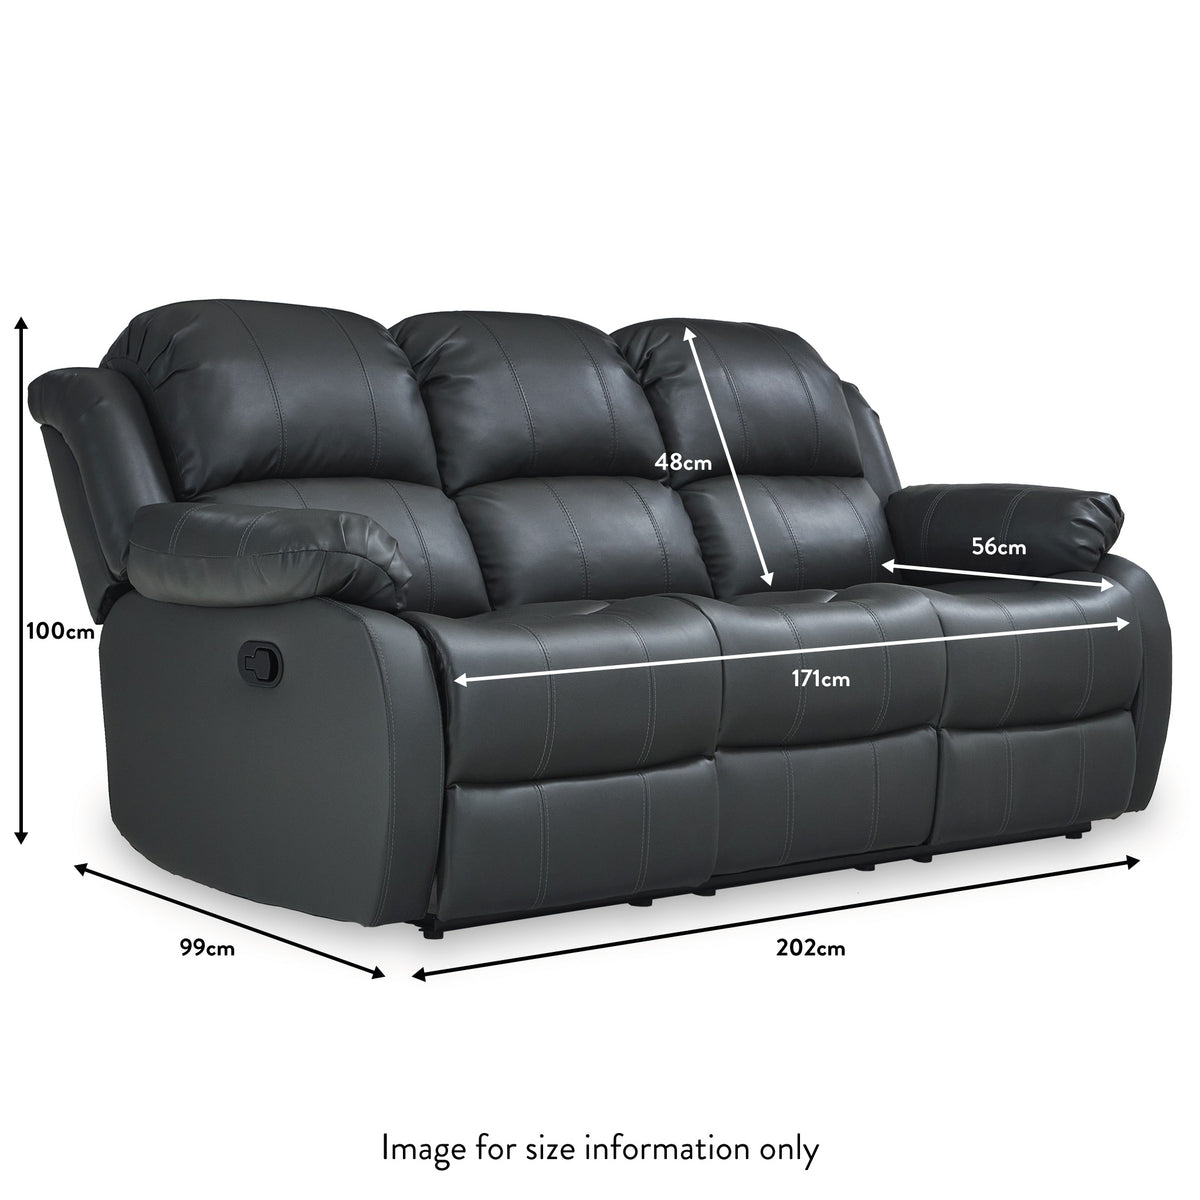 Anton Grey Leather Reclining 3 Seater Sofa dimensions